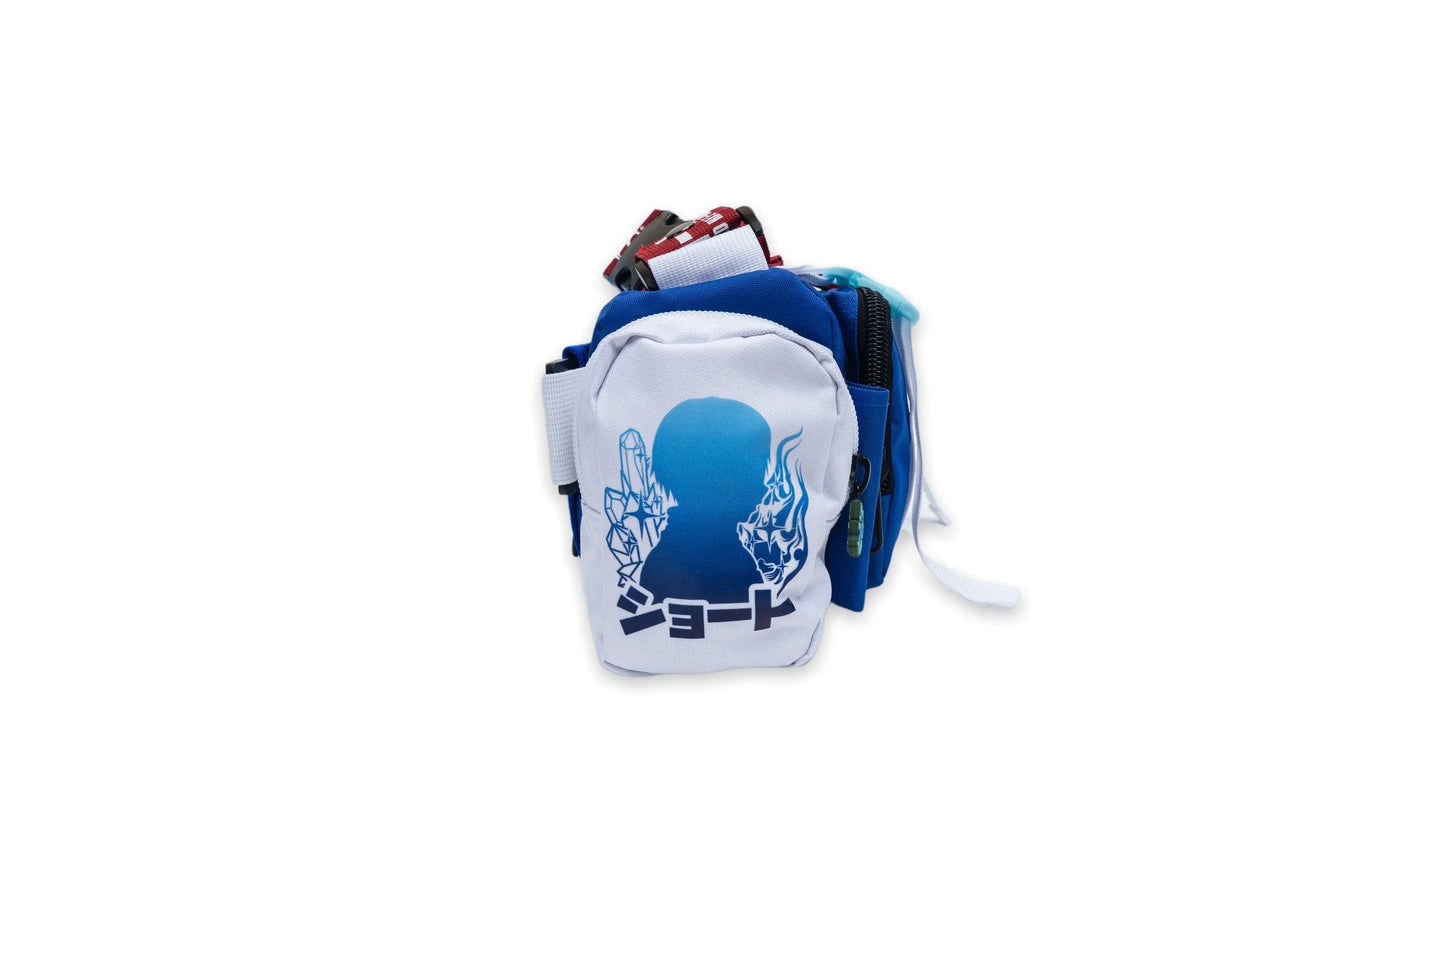 SHWA -  Todoroki Mini Duffle with Strap (Pre-Order) Patches Included